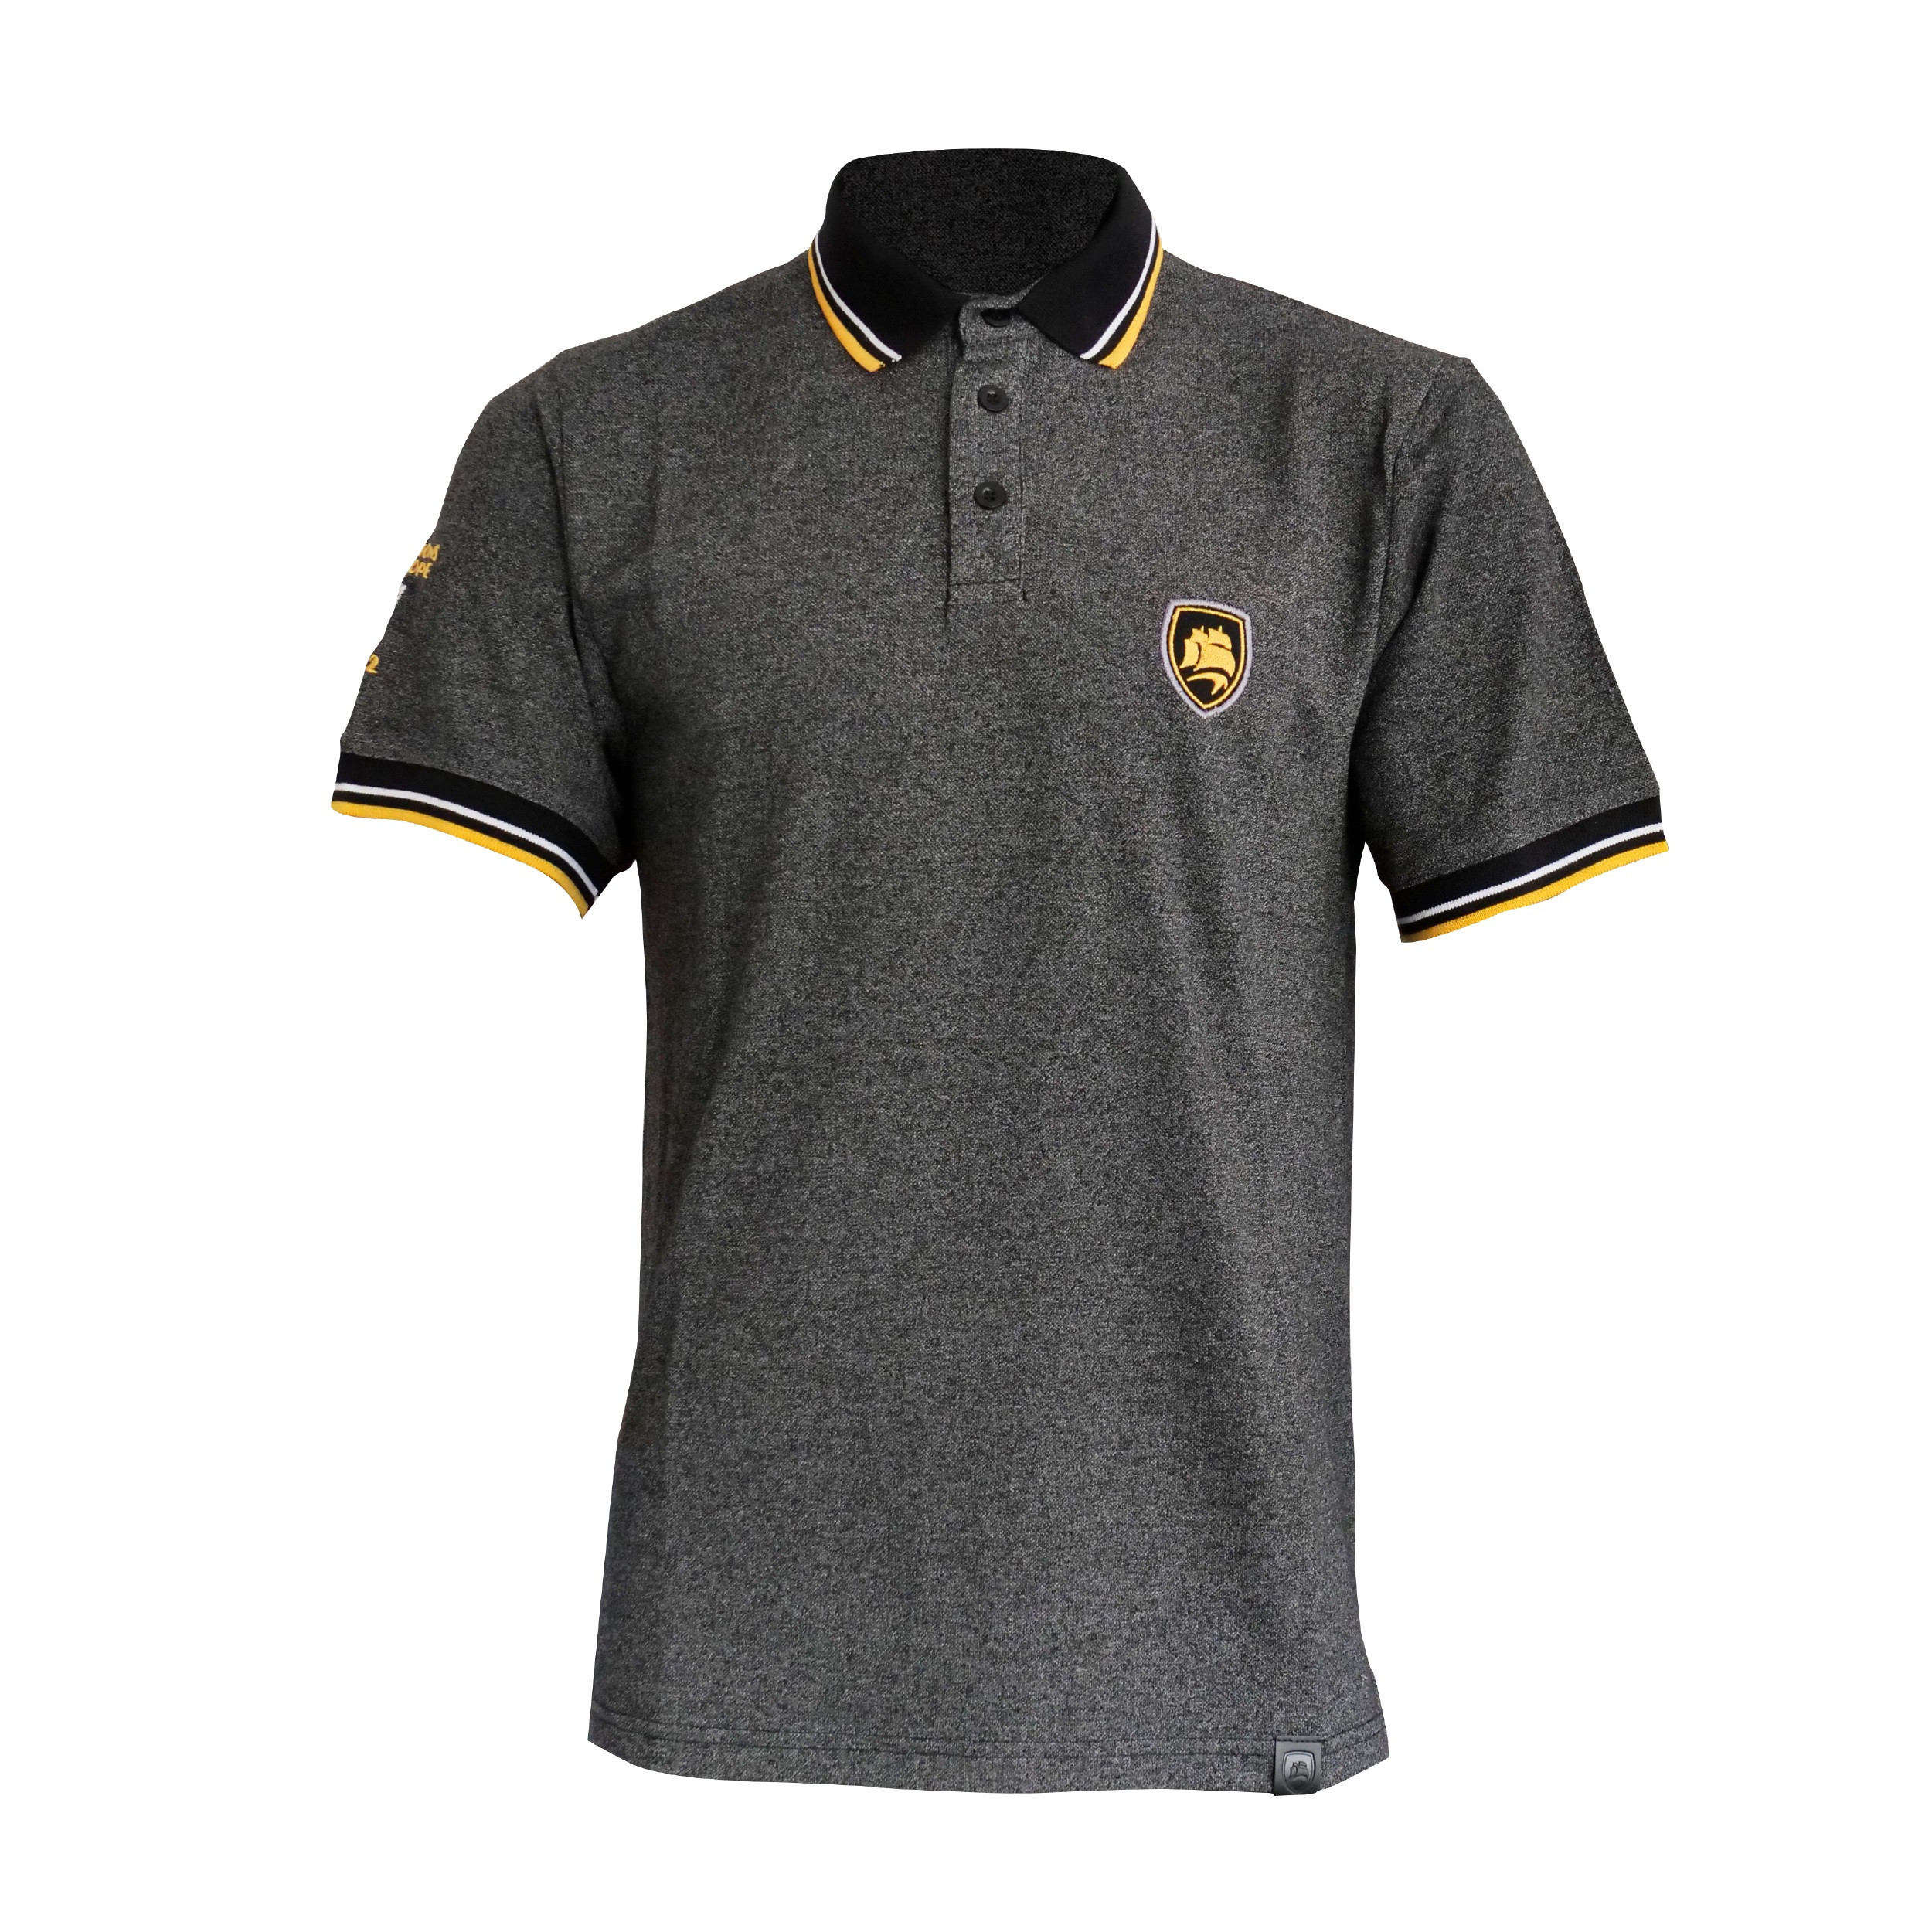 Polo CUP gris collection "Champion d'Europe" - Polos/ chemises - Homme -  Mode